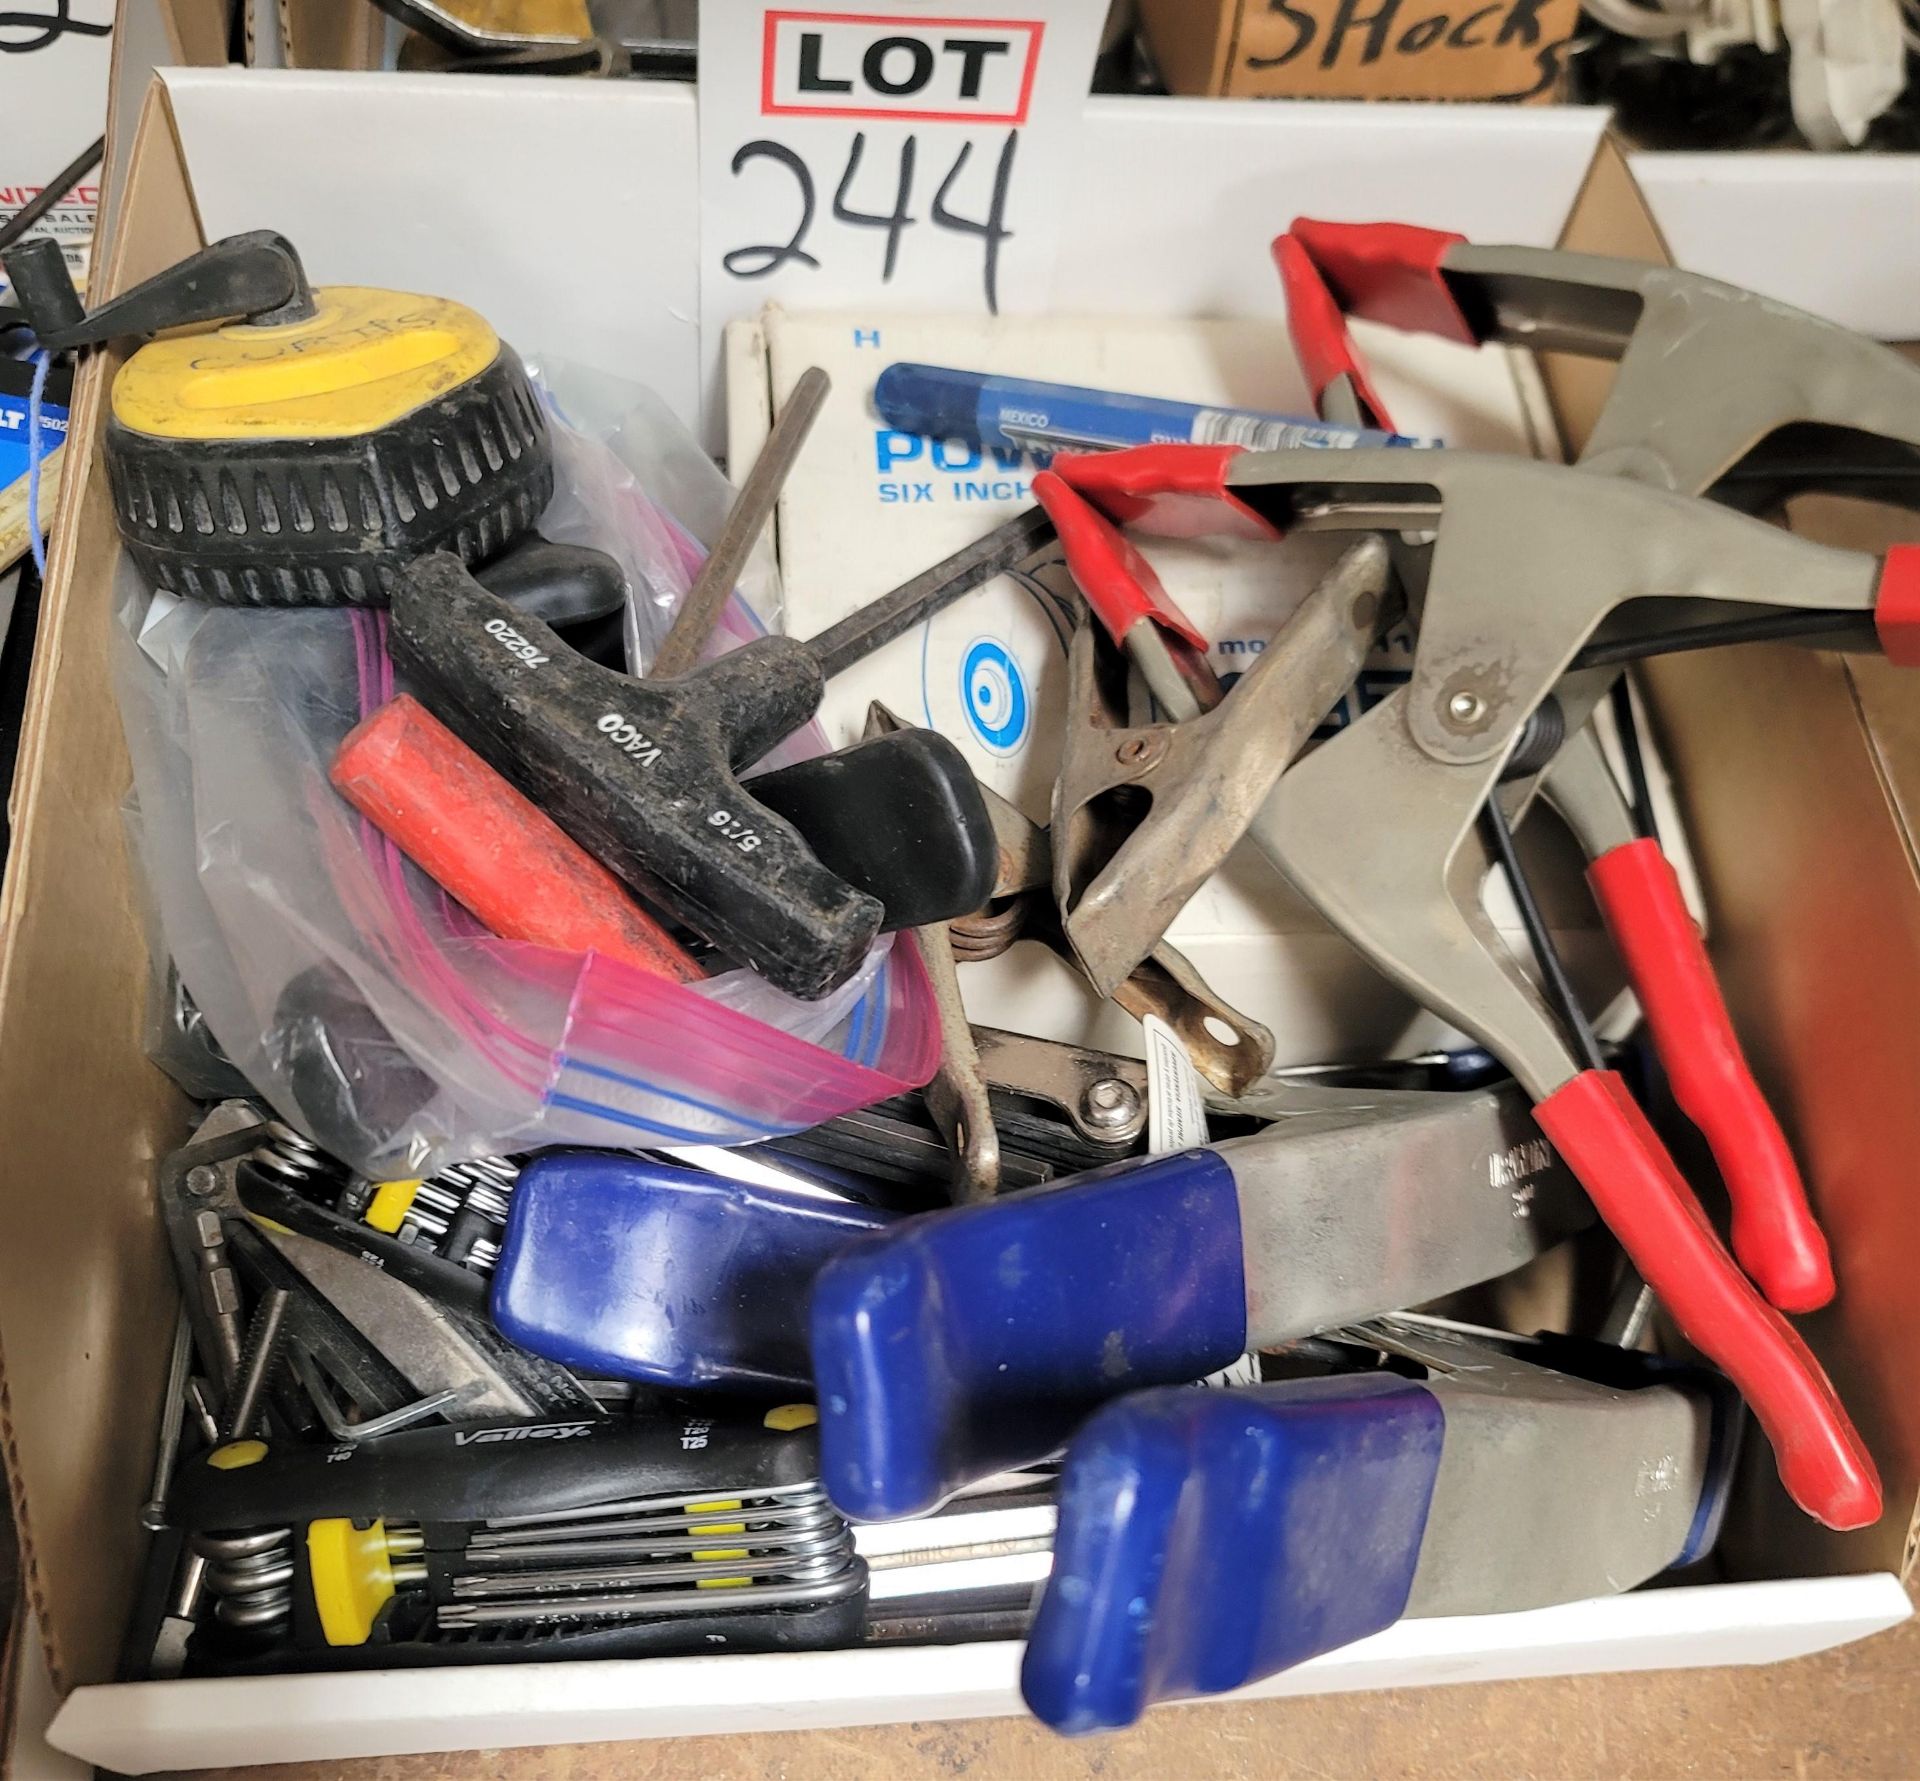 LOT - ALLEN & TORX WRENCHES, SPRING CLAMPS, 6" V-GROOVE STEEL WHEEL, ETC.